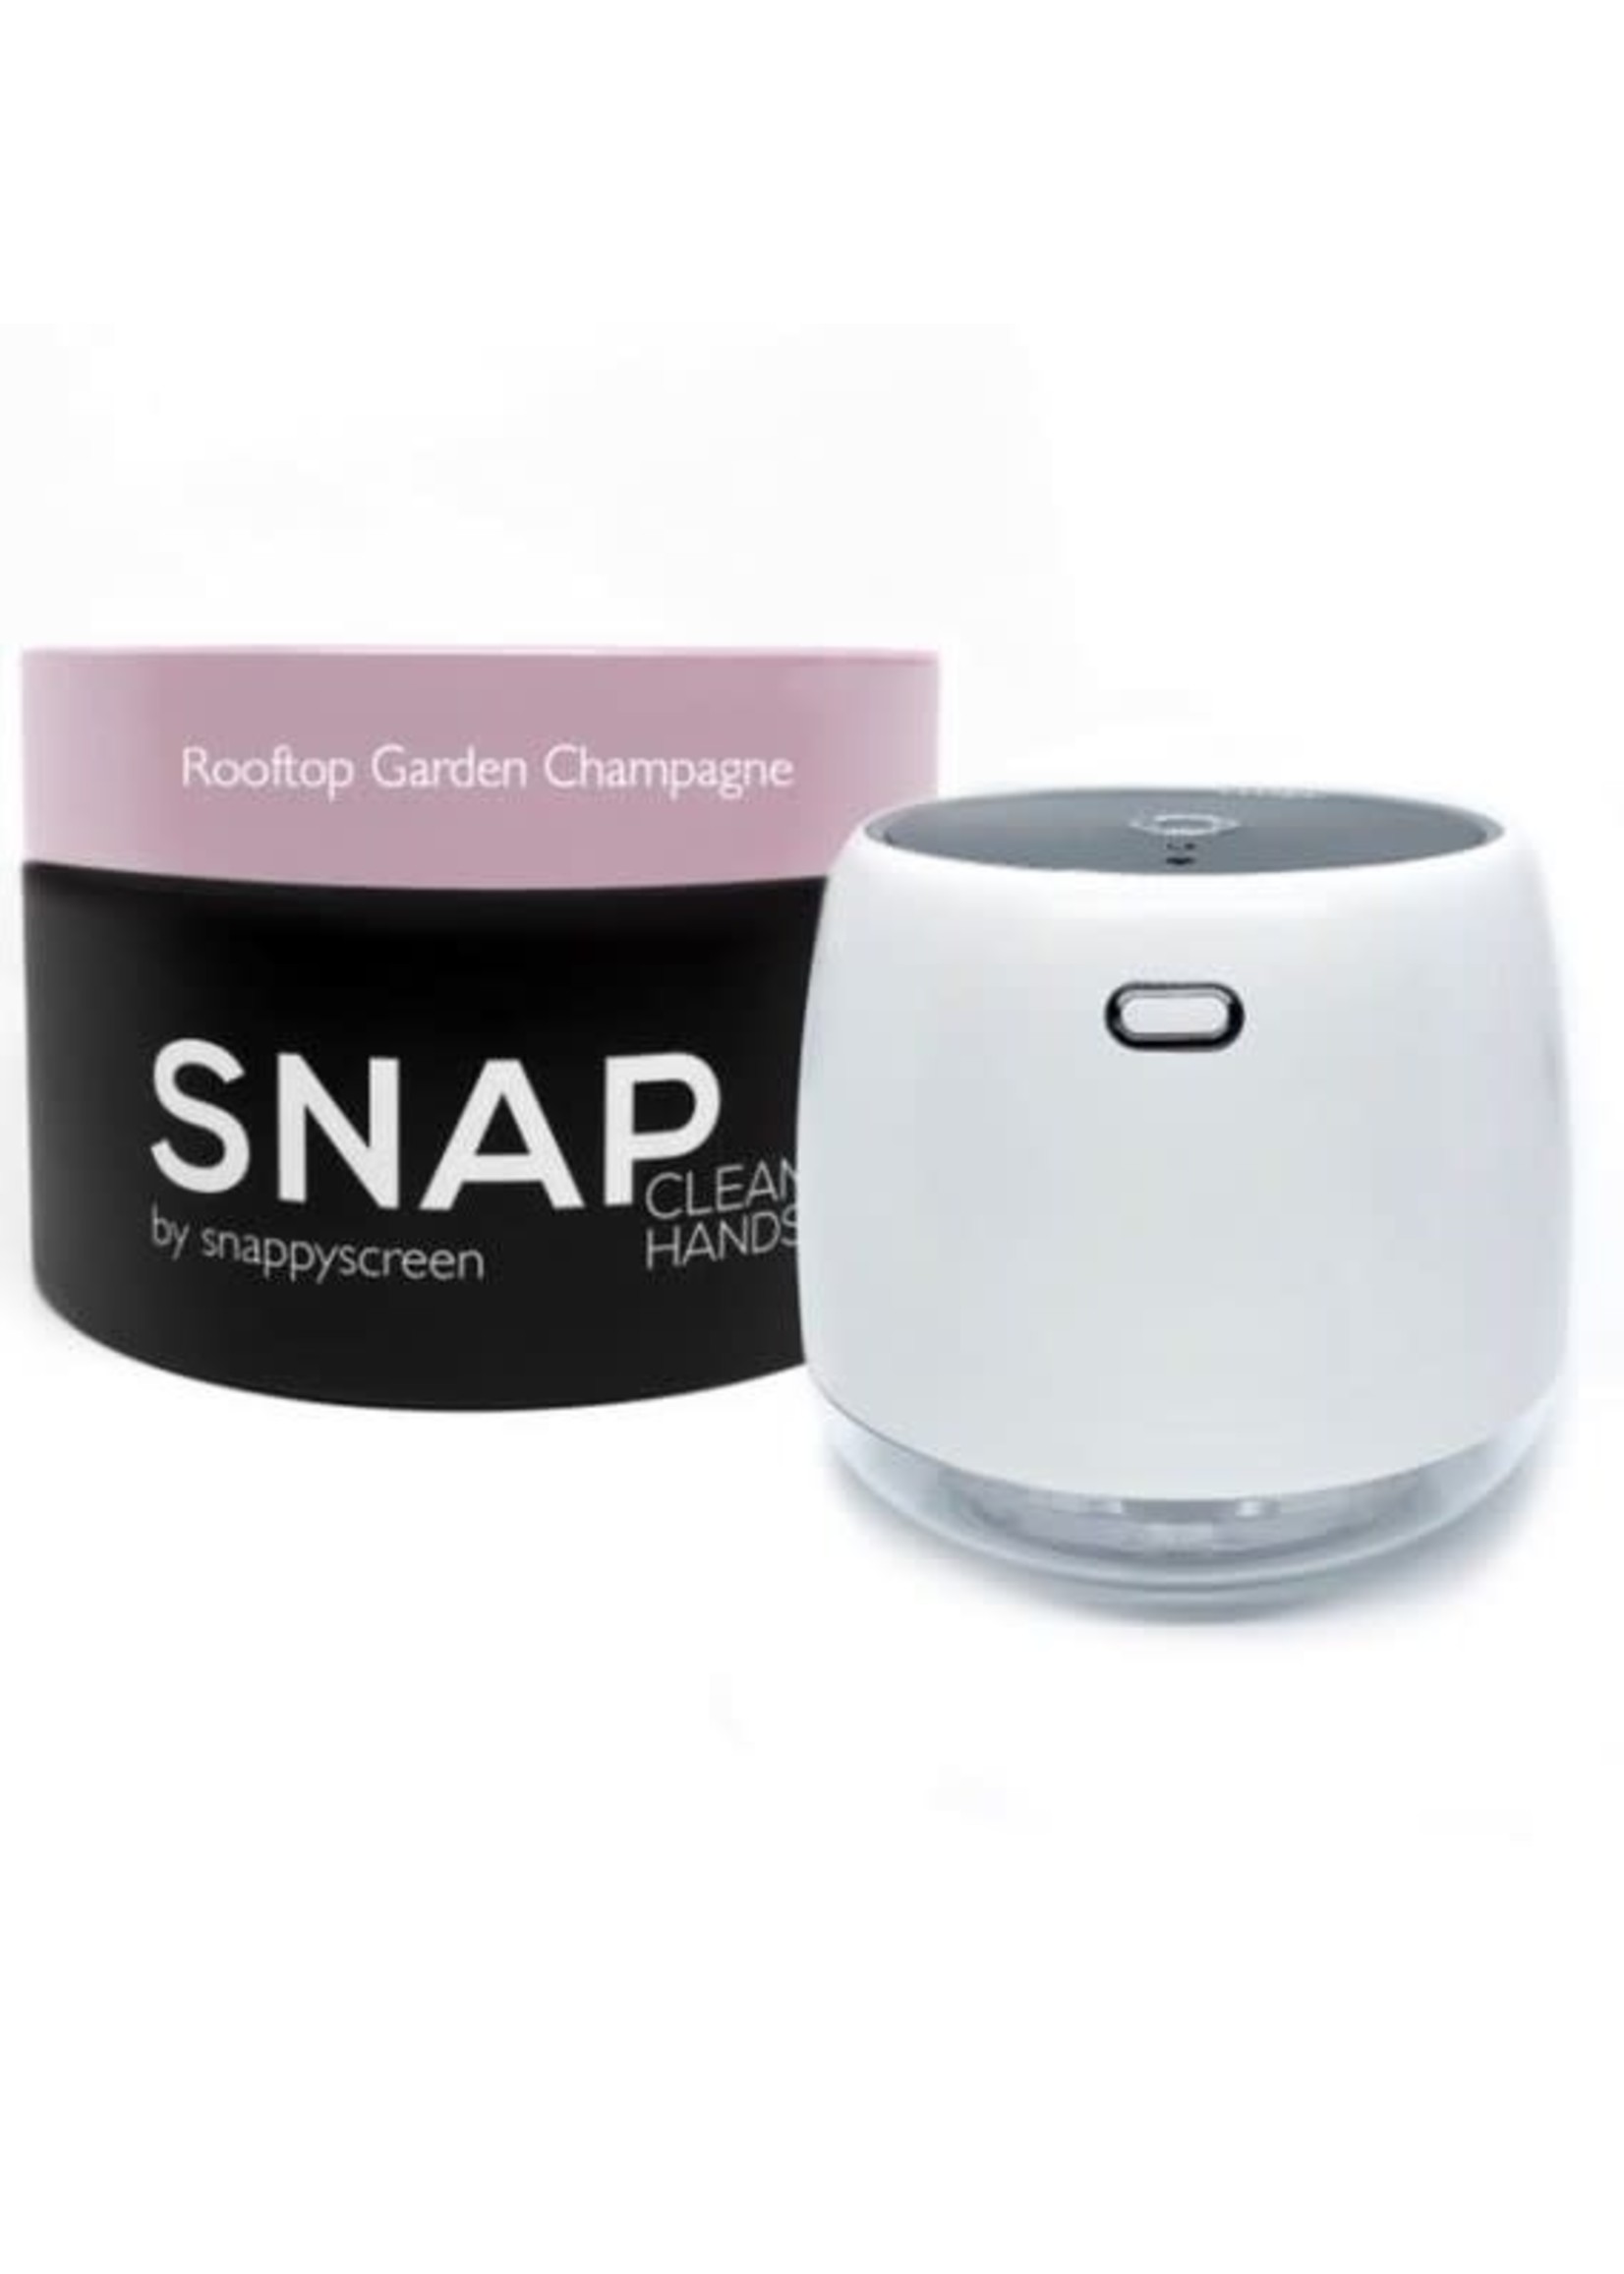 Snappyscreen Touchless Mist Sanitizer (PINK) - Rooftop Garden Champagne